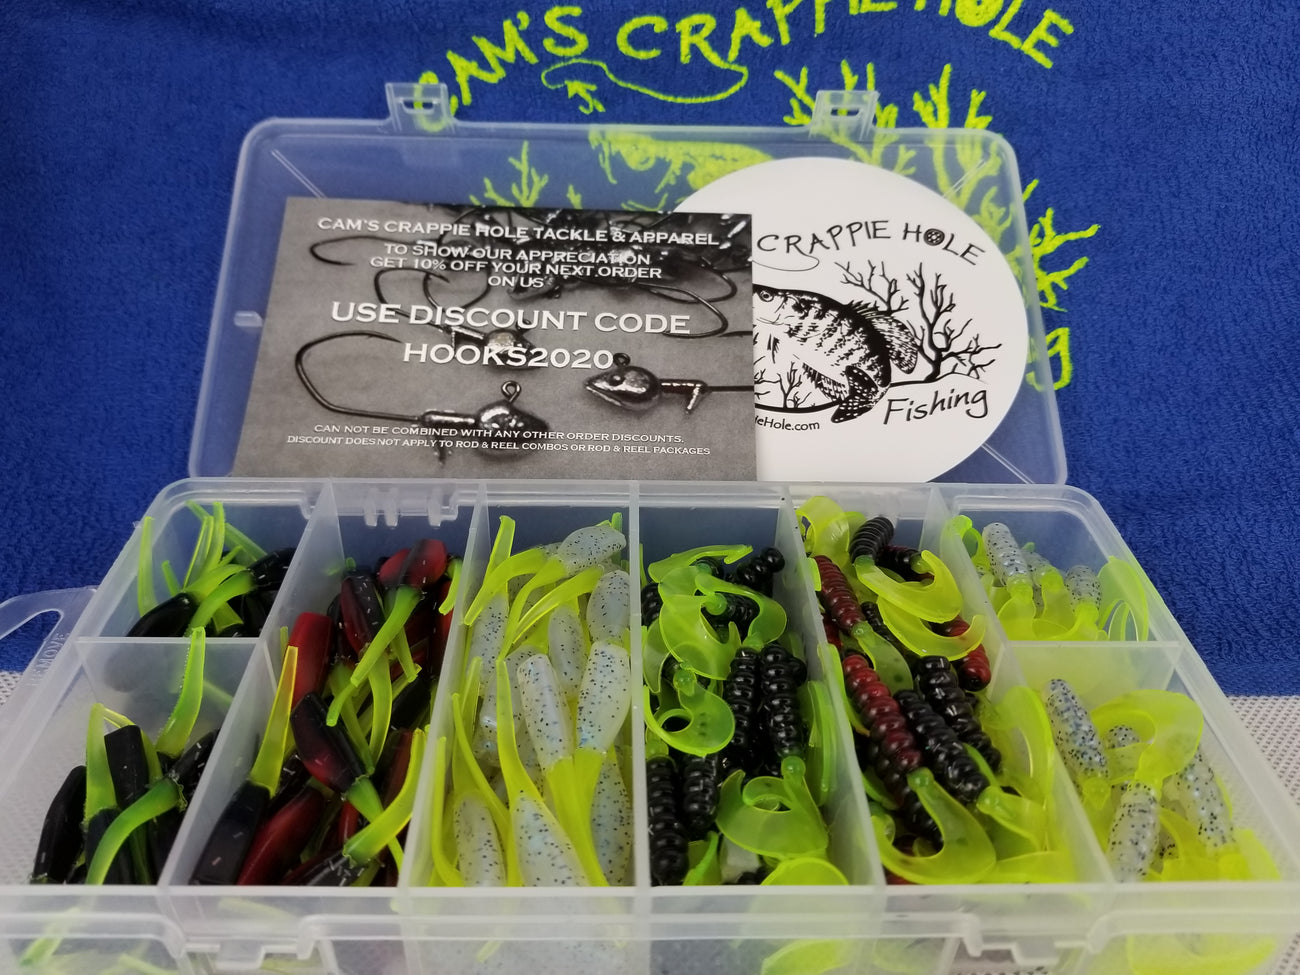 Catalog – Page 6 – Cam's CRAPPIE HOLE TACKLE & APPAREL